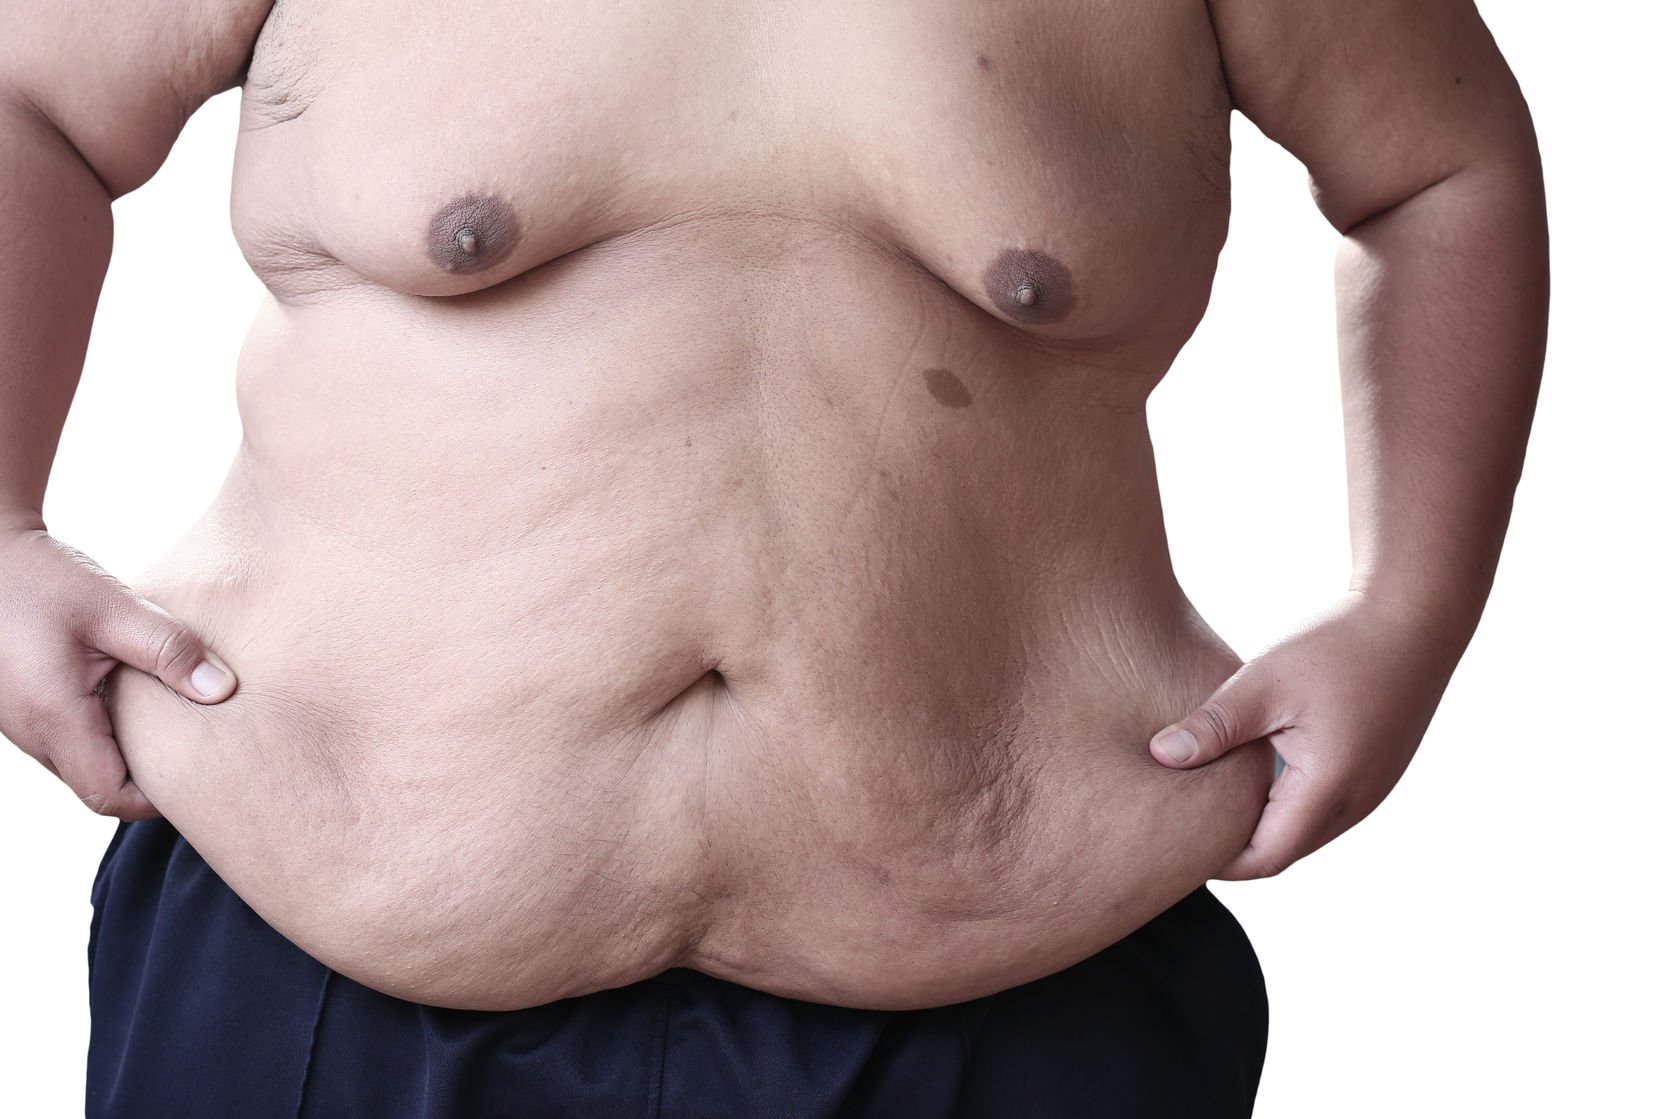 best plastic surgeon to remove excess skin bariatric